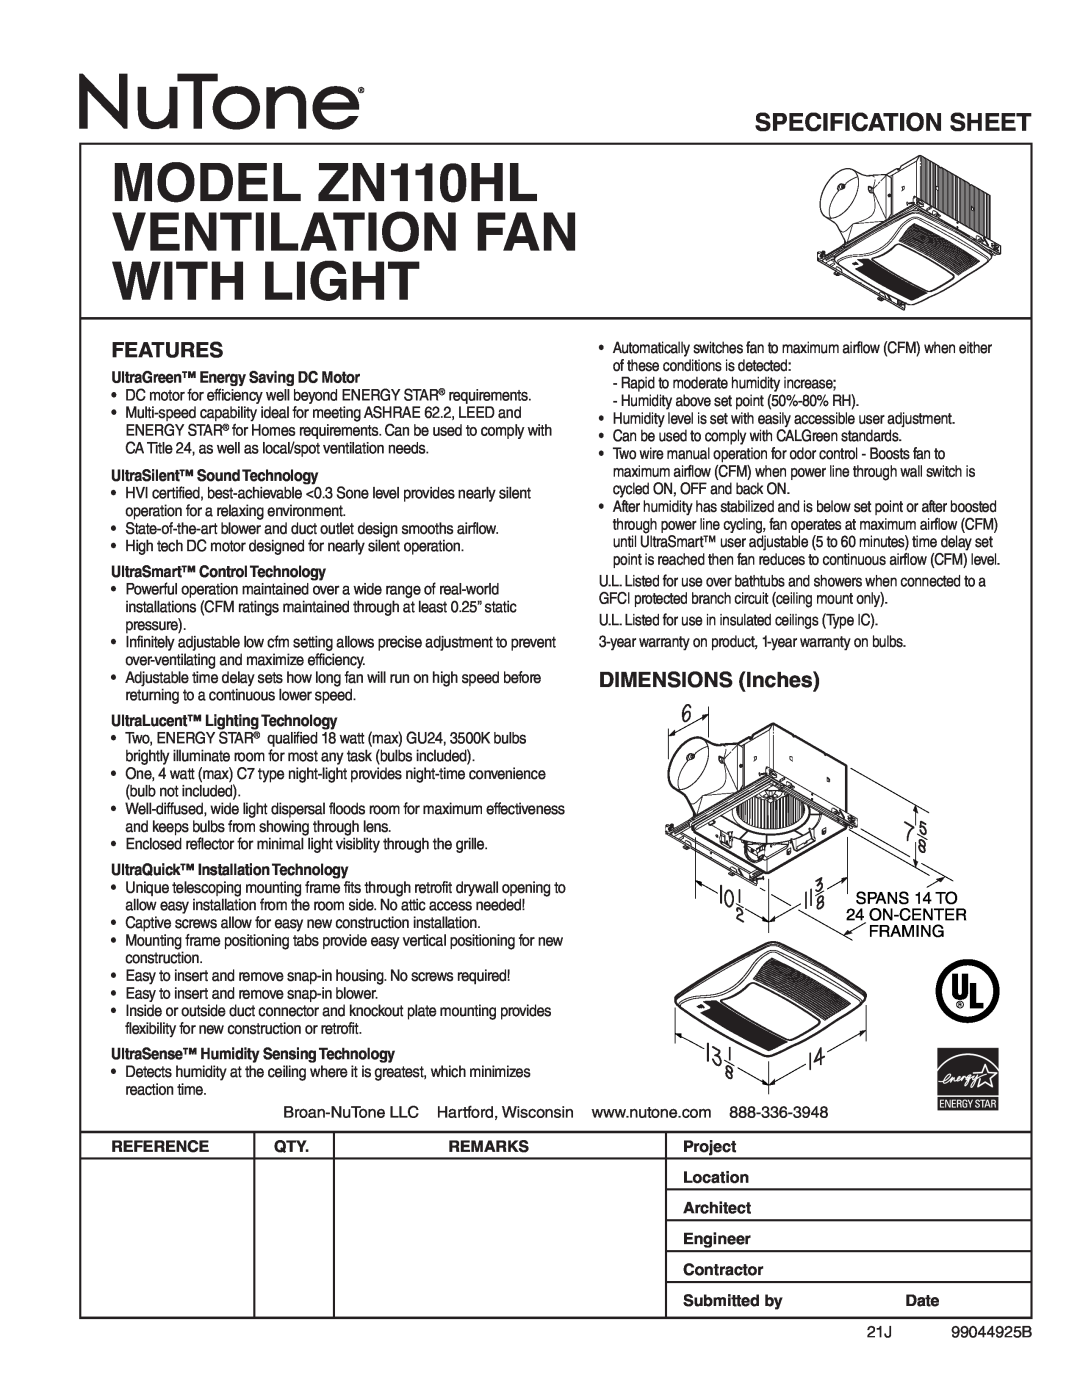 NuTone specifications Features, DIMENSIONS Inches, MODEL ZN110HL VENTILATION FAN WITH LIGHT, Specification Sheet 